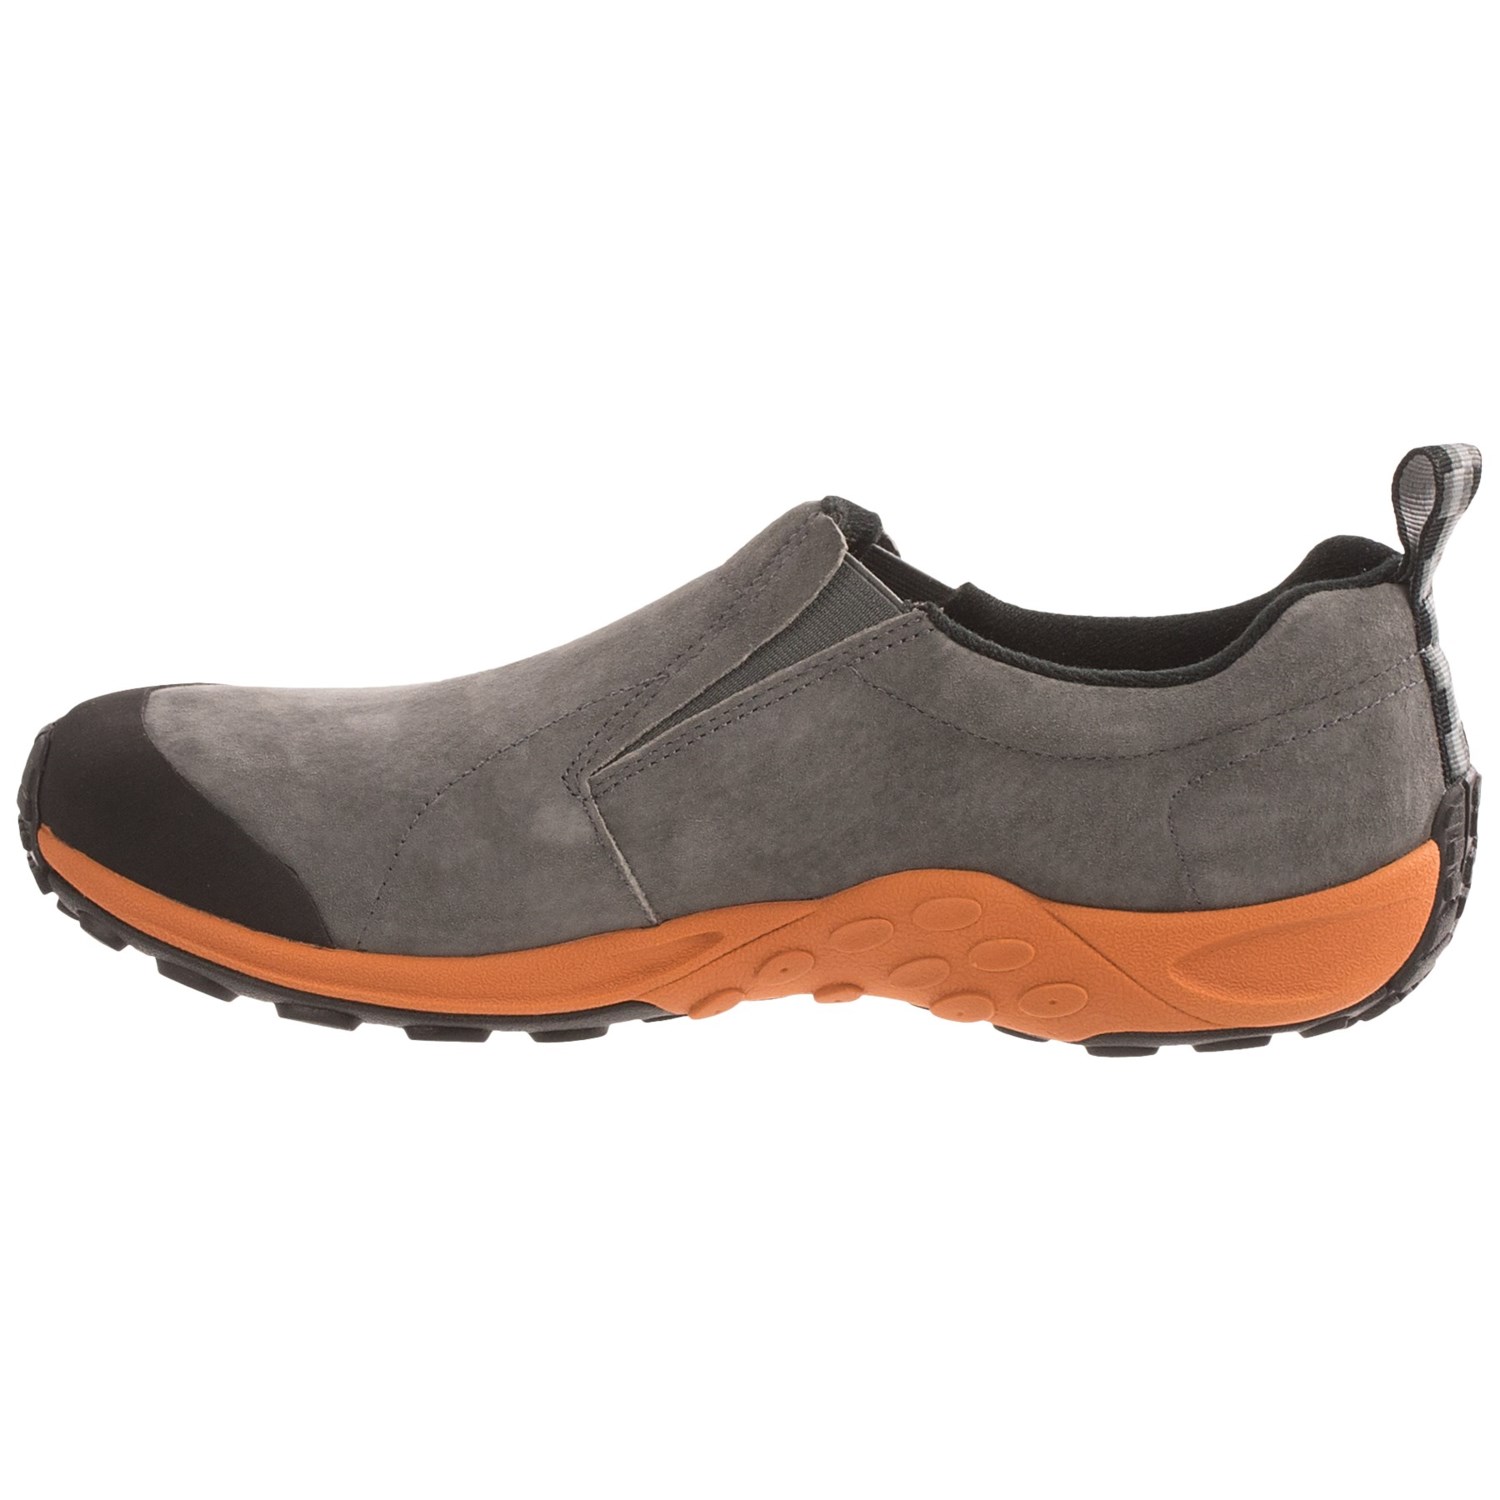 Merrell Jungle Moc Touch Shoes (For Men) 8118A - Save 29%